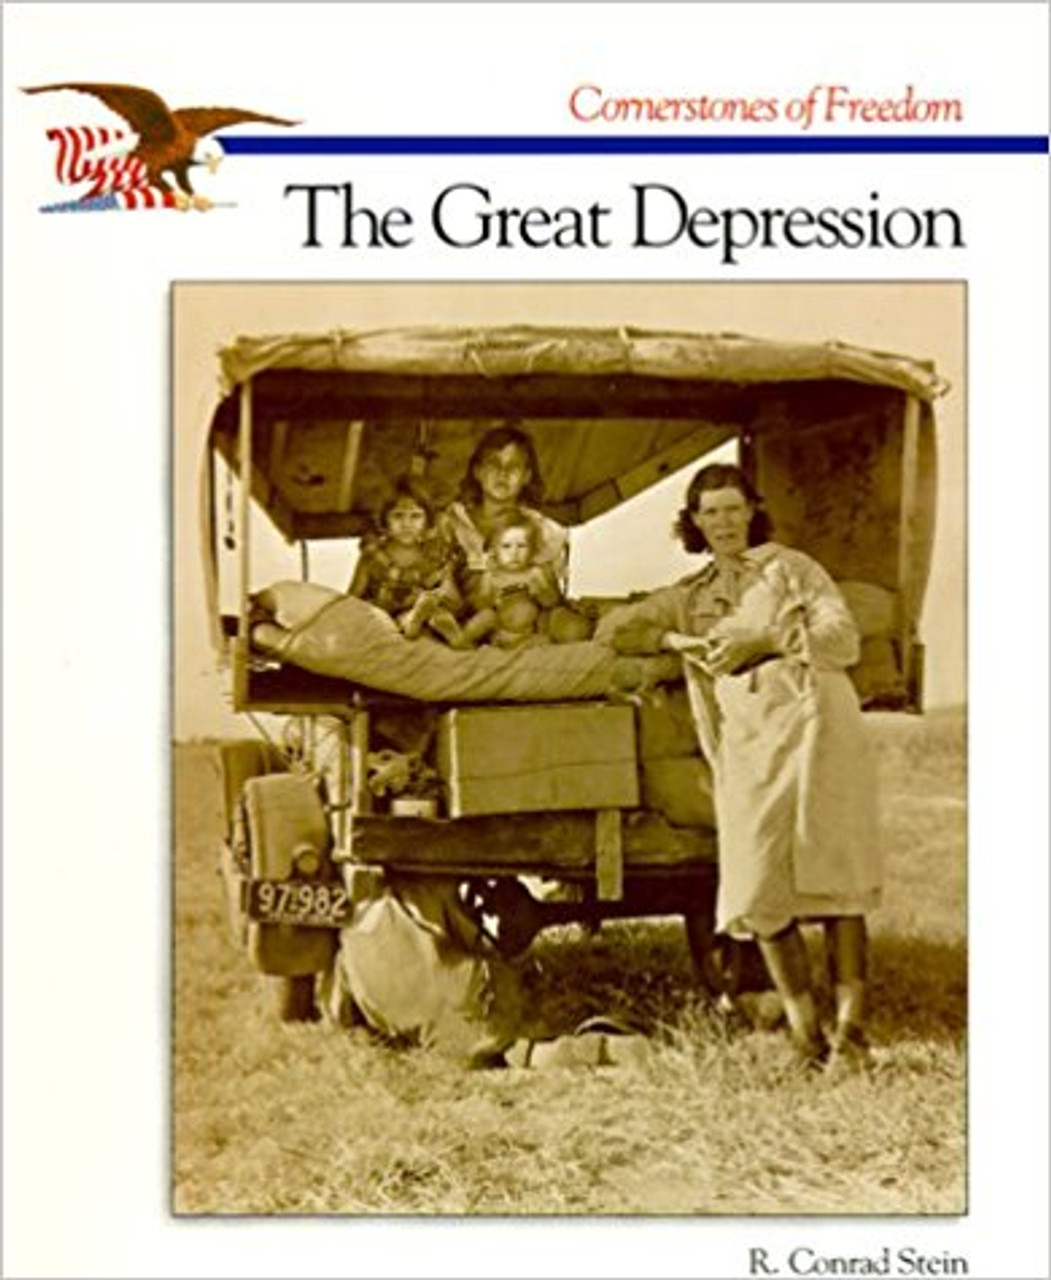 In the summer of 1929, the United States entered a recession, as it had many times before. However, this would be no ordinary economic downturn. Over the next several years, the economies of many other countries began to suffer as well. Soon, much of the world had plunged into the Great Depression, an economic disaster unlike any other. This book investigates the causes, immediate effects, and lasting impact of the Depression.